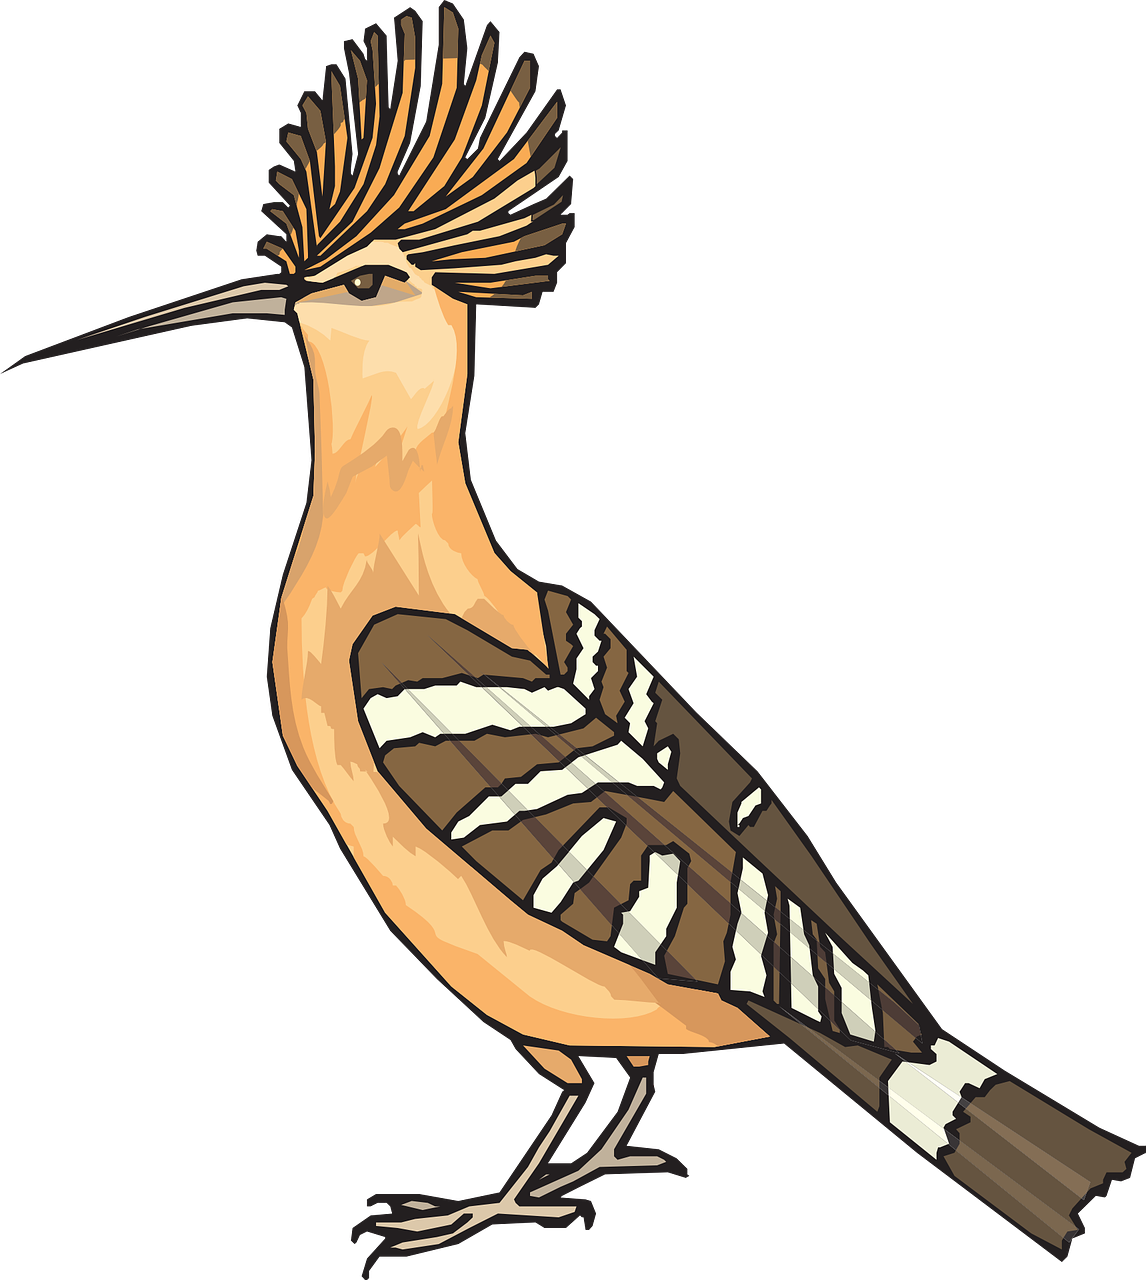 angry,bird,hoopoe,wings,feathers,breed,free vector graphics,free pictures, free photos, free images, royalty free, free illustrations, public domain